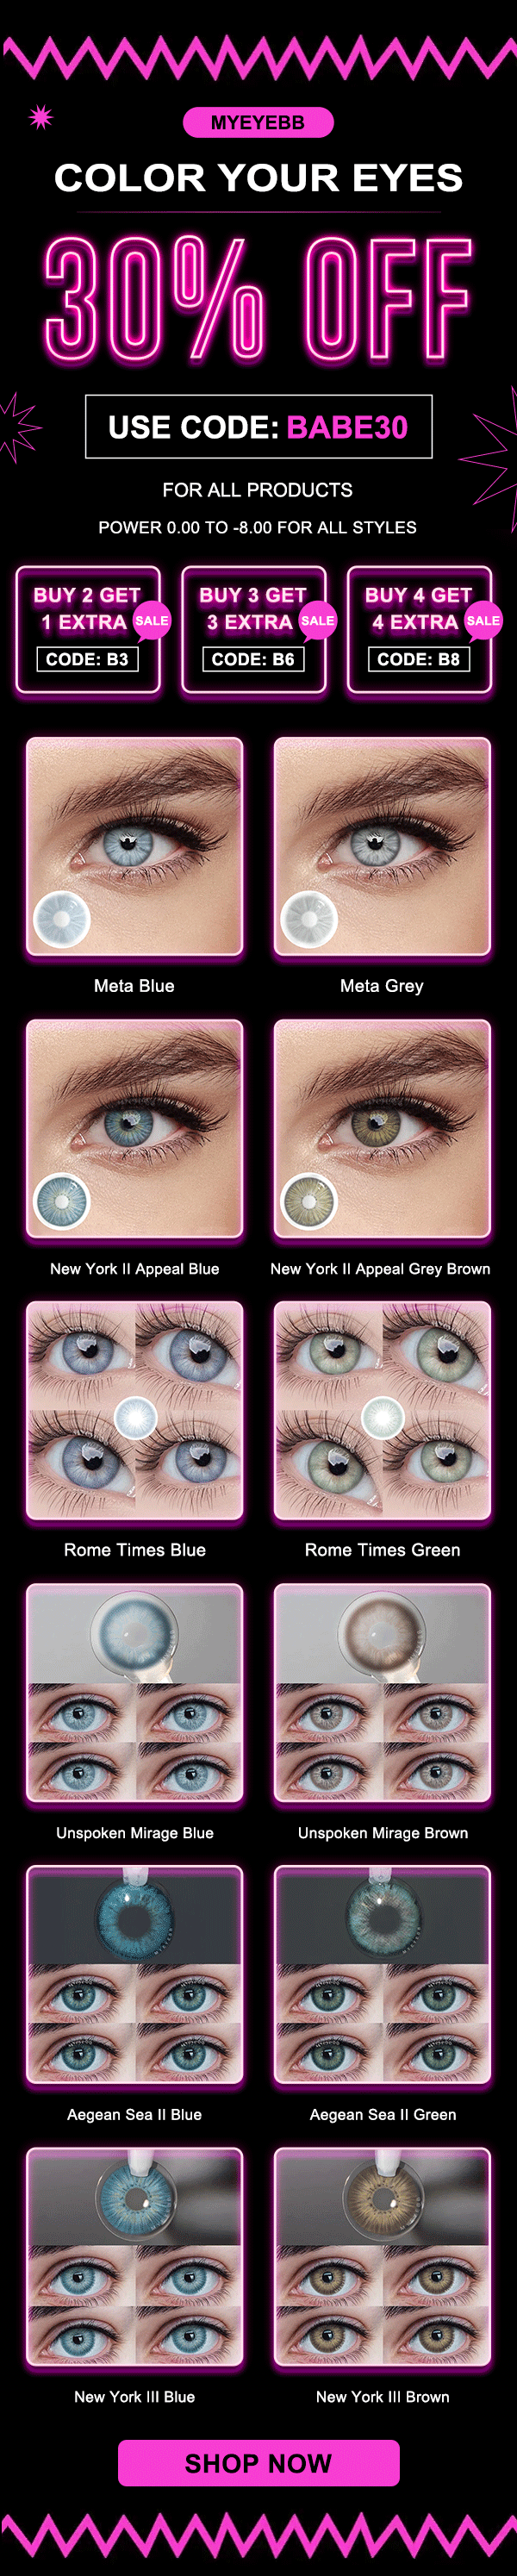 COLOR YOUR EYES U USE CODE: FOR ALL PRODUCTS POWER 0.00 TO -8.00 FOR ALL STYLES BUY 2 GET S LT CODE: B3 BUY 3 GET NS QTN CODE: B6 BUY 4 GET LY Q VN T CODE: B8 Meta Blue Meta Grey New York Il Appeal Blue New York Il Appeal Grey Brown New York Il Blue New York Ill Brown 